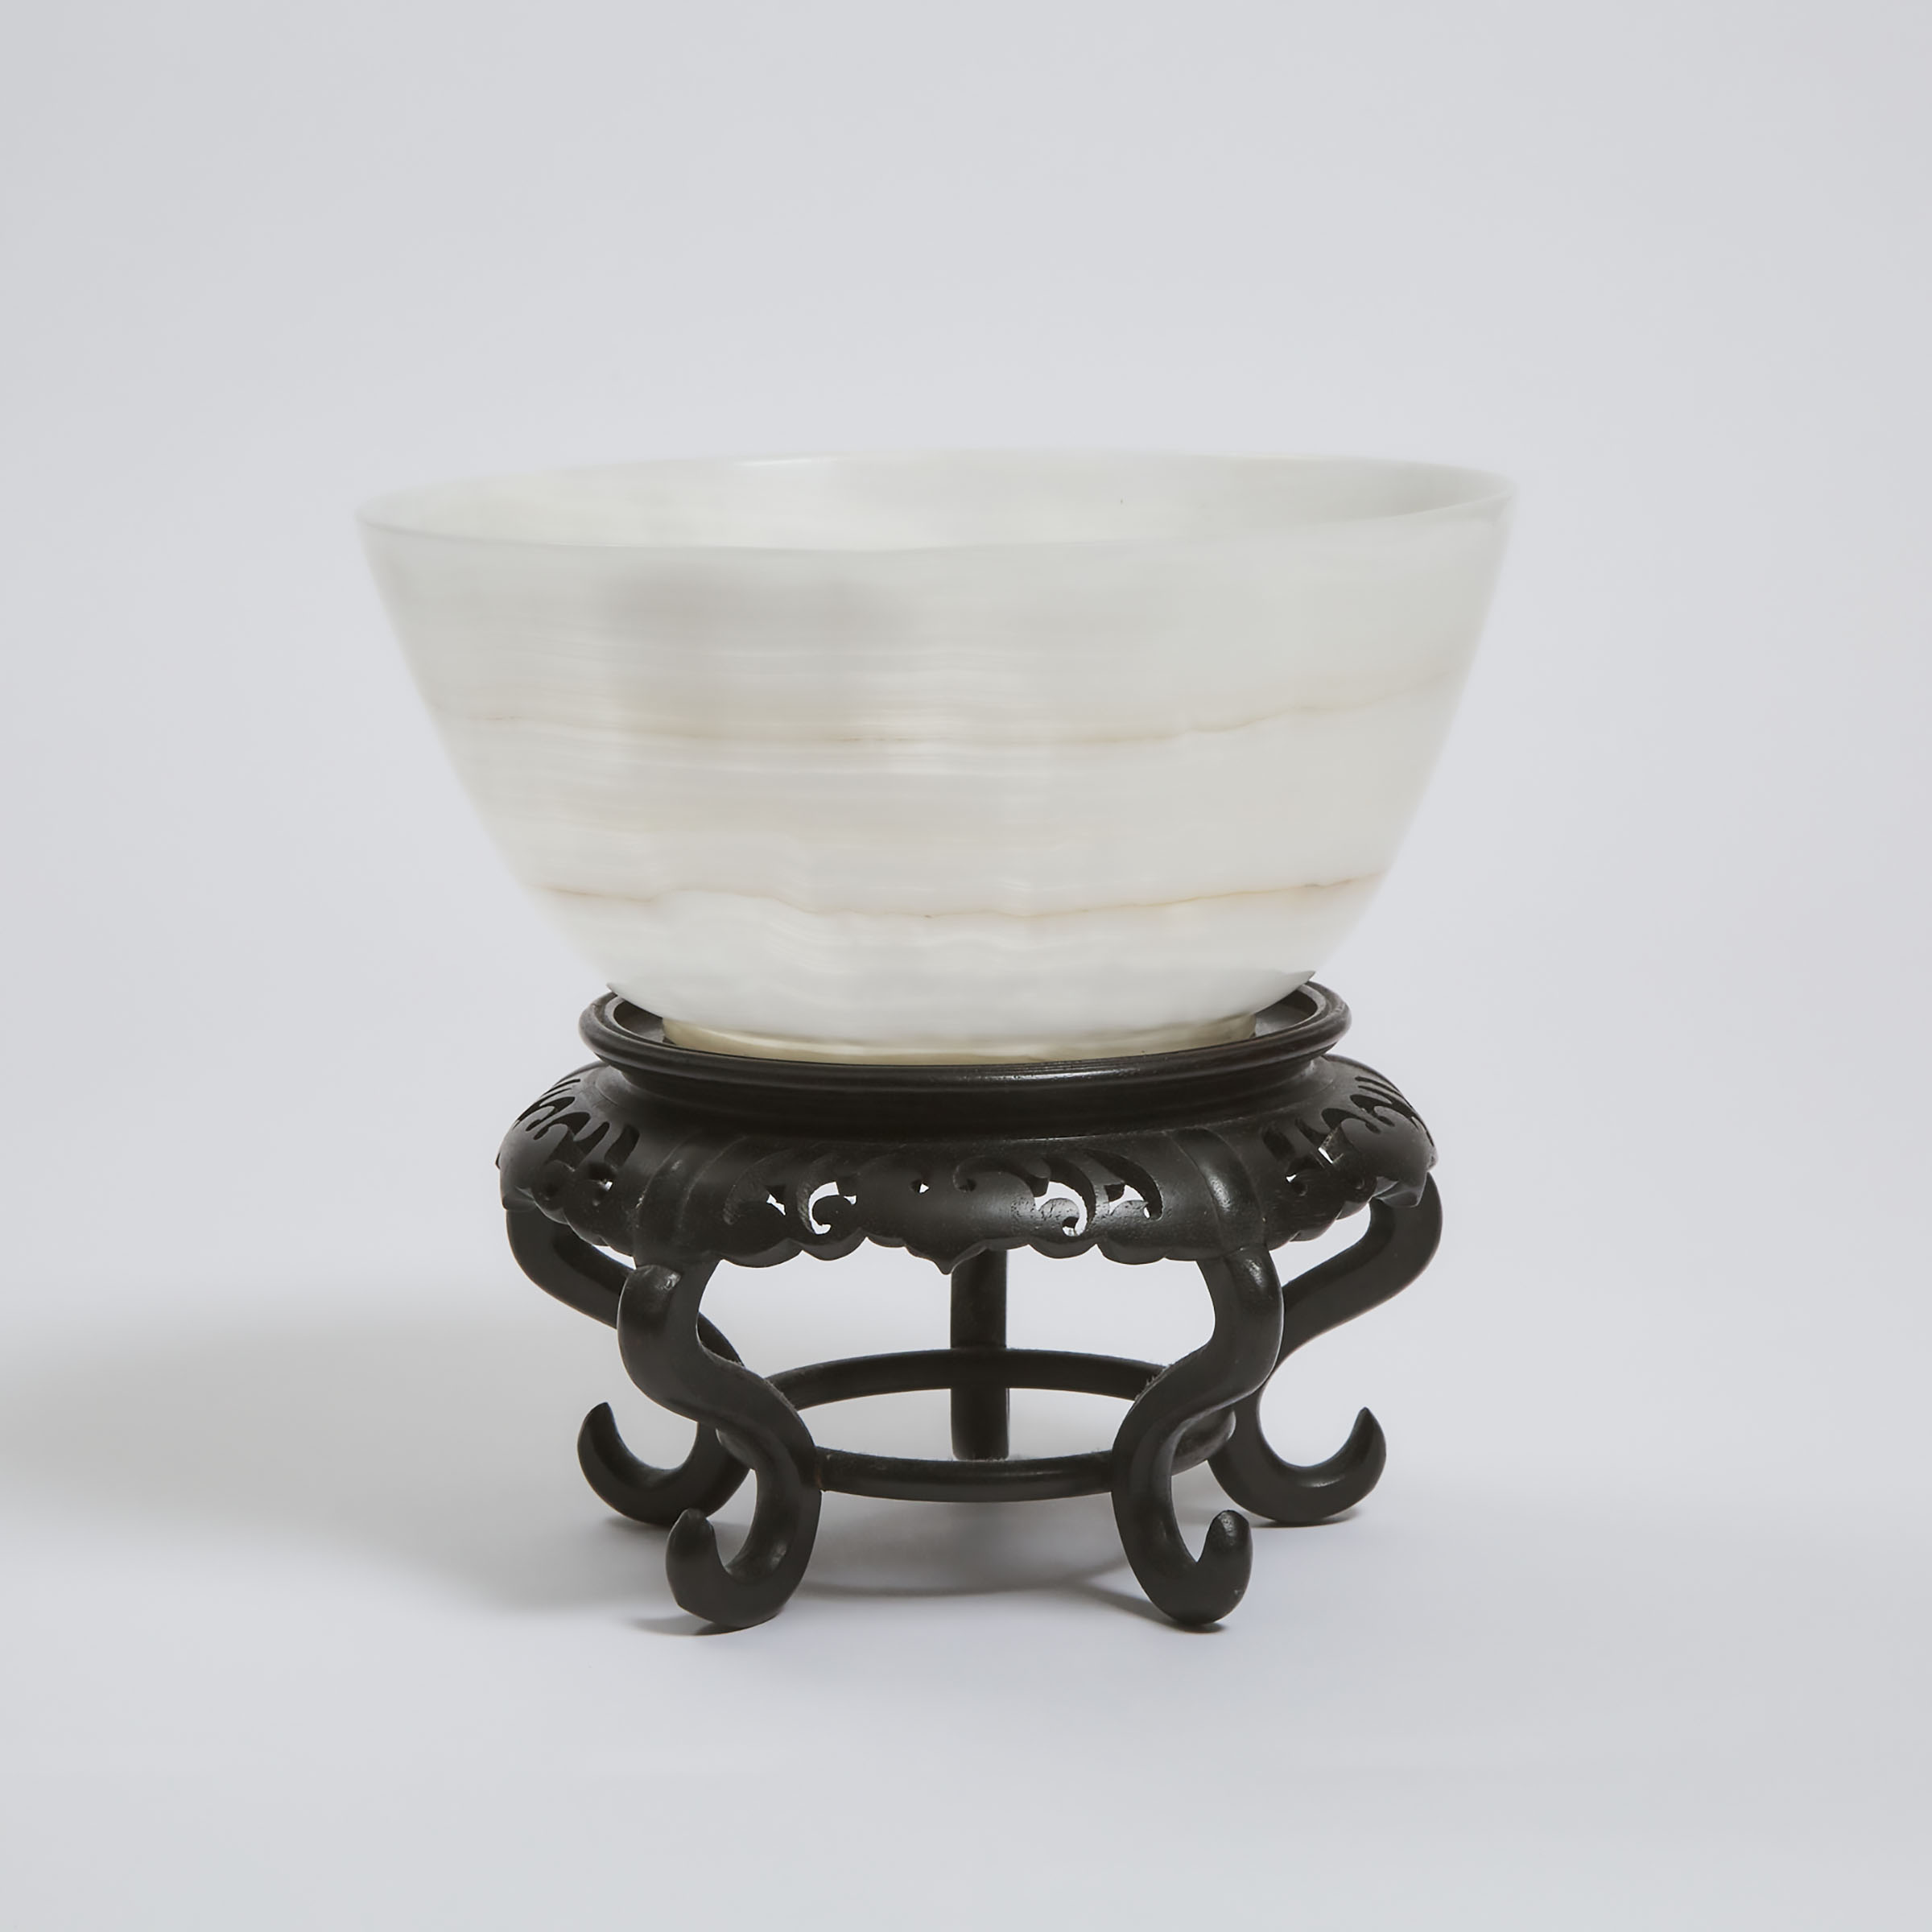 A Large Banded Agate Bowl, 19th/20th Century